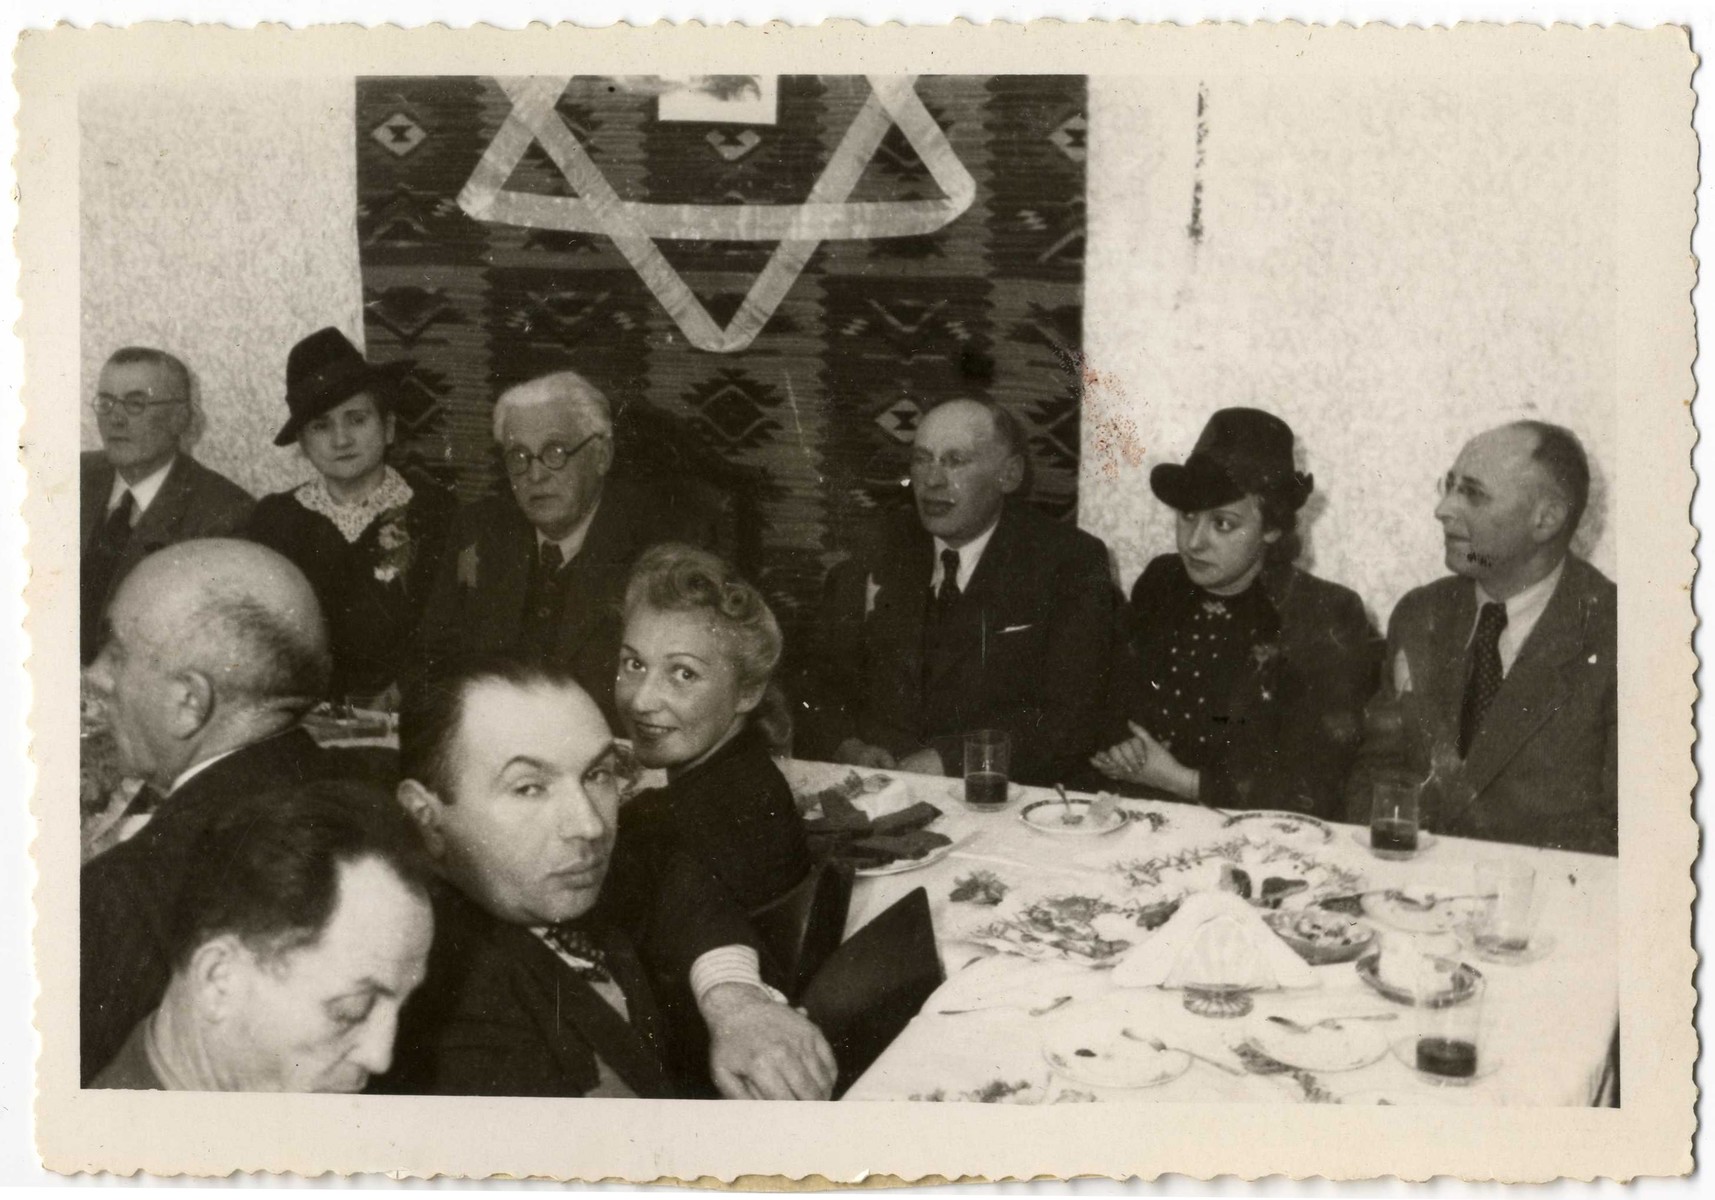 Ghetto officials gather for a festive meal in front of a wall hanging with a large Jewish star.

Seated in the center of the table is Chairman, Mordechai Chaim Rumkowski.  To his left is his sister-in-law Helena Rumkowski.  To his right are Dawid Warszawski and Dora Fuks.